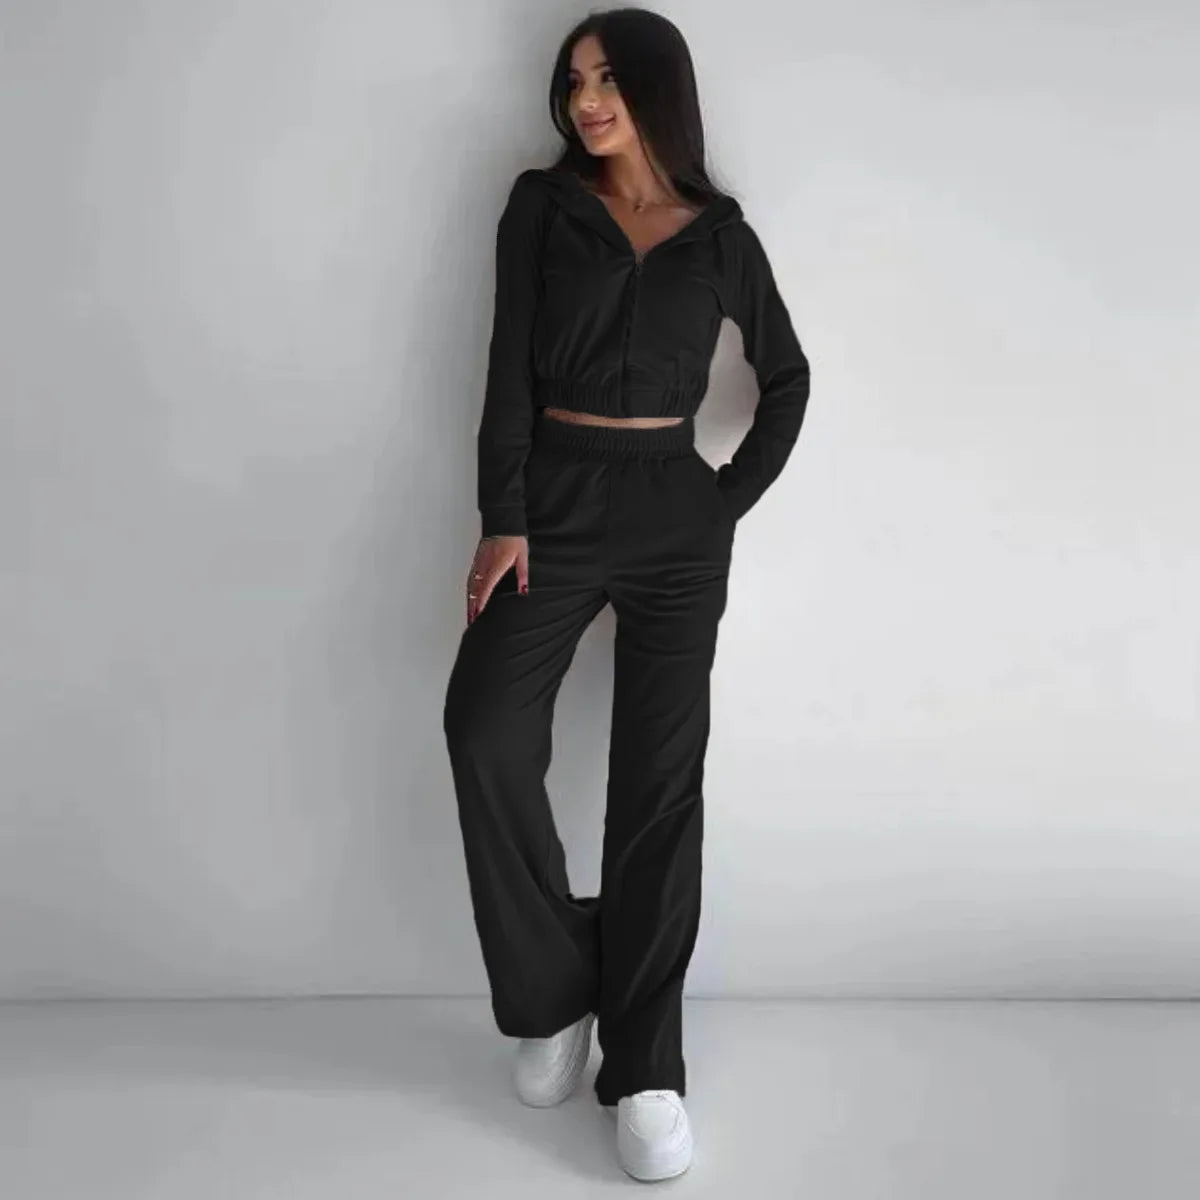 Women's Autumn/Winter Casual Long-sleeved Hoodie Sports Suit Solid Color Zipper Short Jacket Belted Tracksuit Lady Two-piece Set